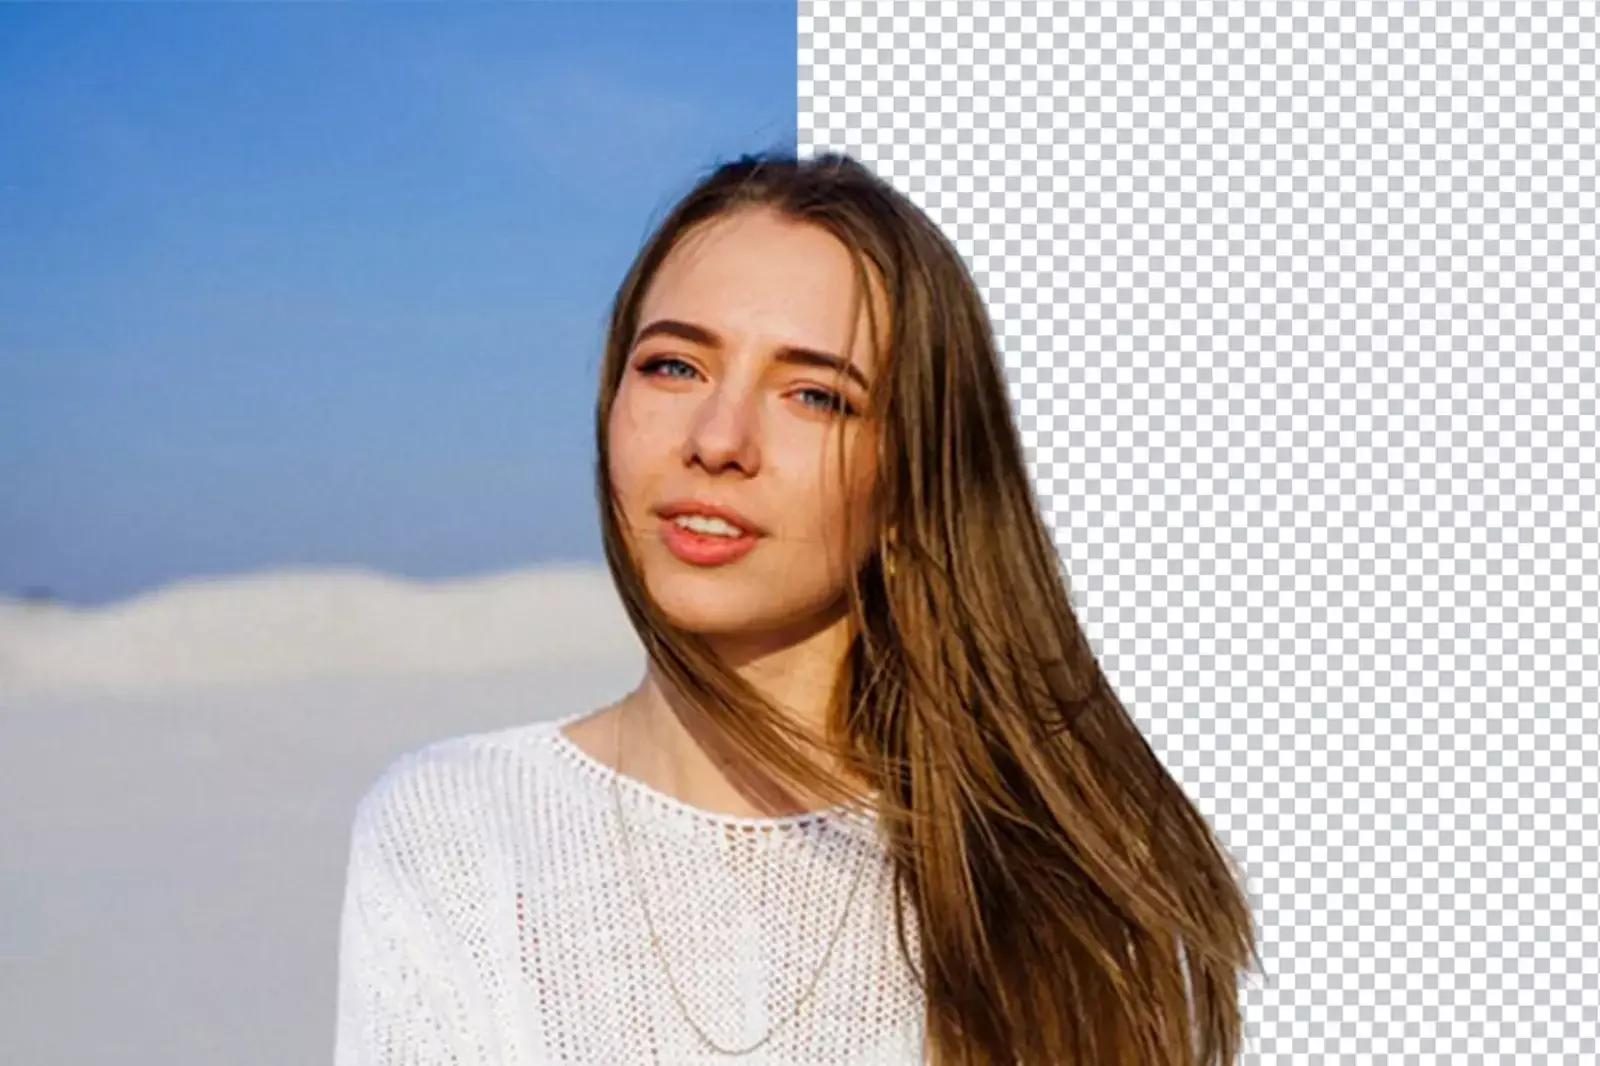 Why Remove the Background from an Image